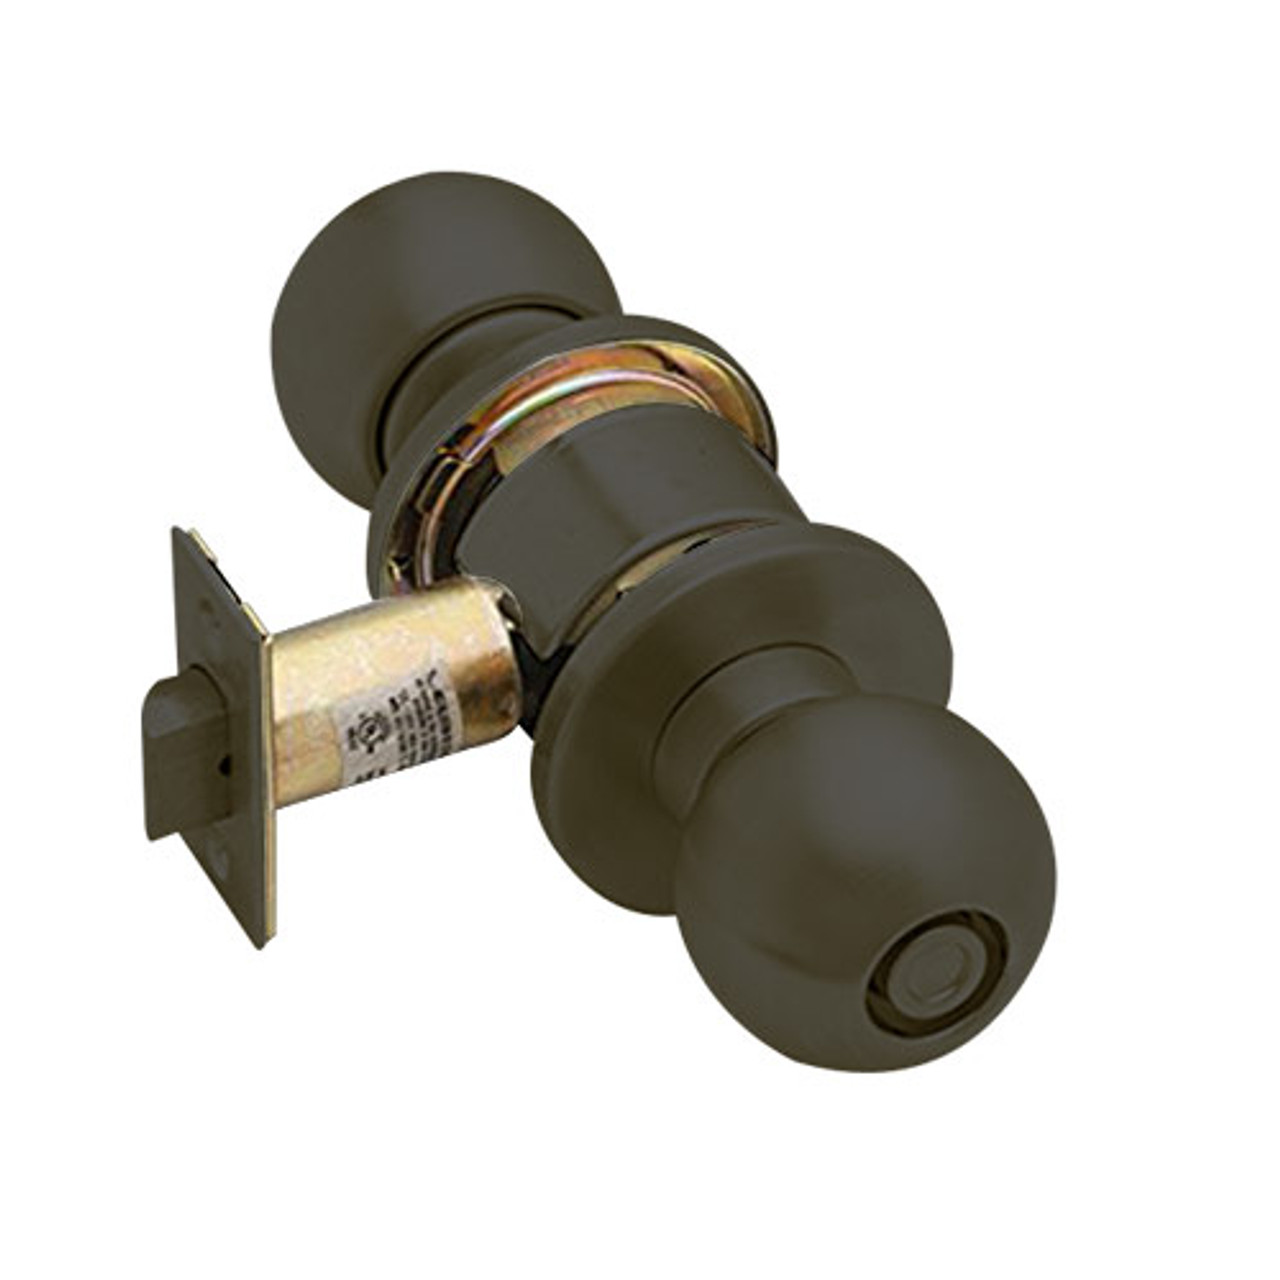 A40S-ORB-613 Schlage Orbit Commercial Cylindrical Lock in Oil Rubbed Bronze